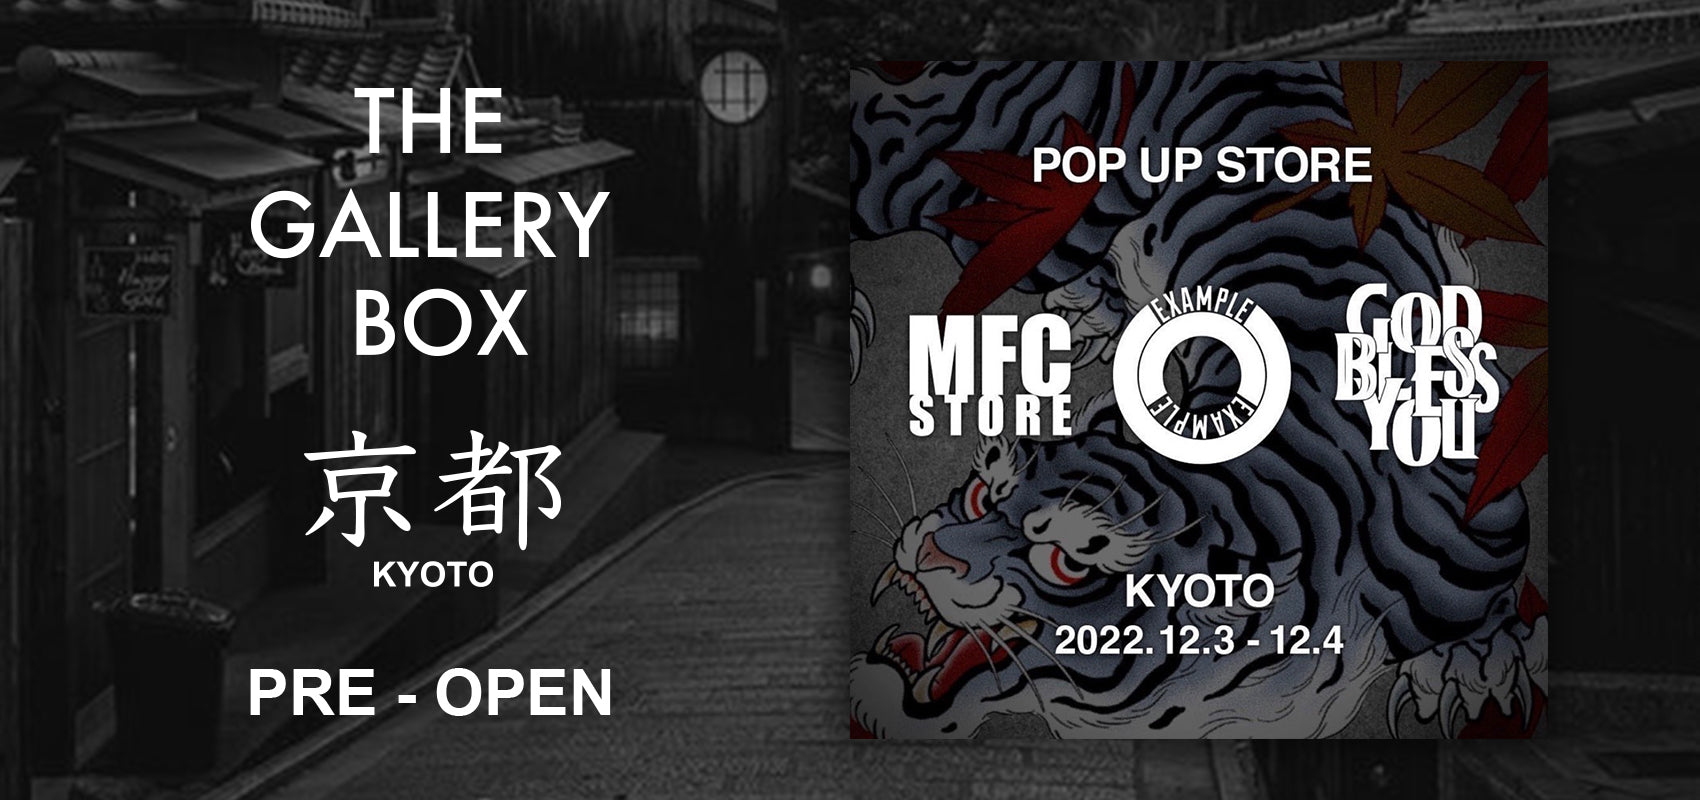 THE GALLERY BOX KYOTO / PRE - OPEN & POP UP STORE